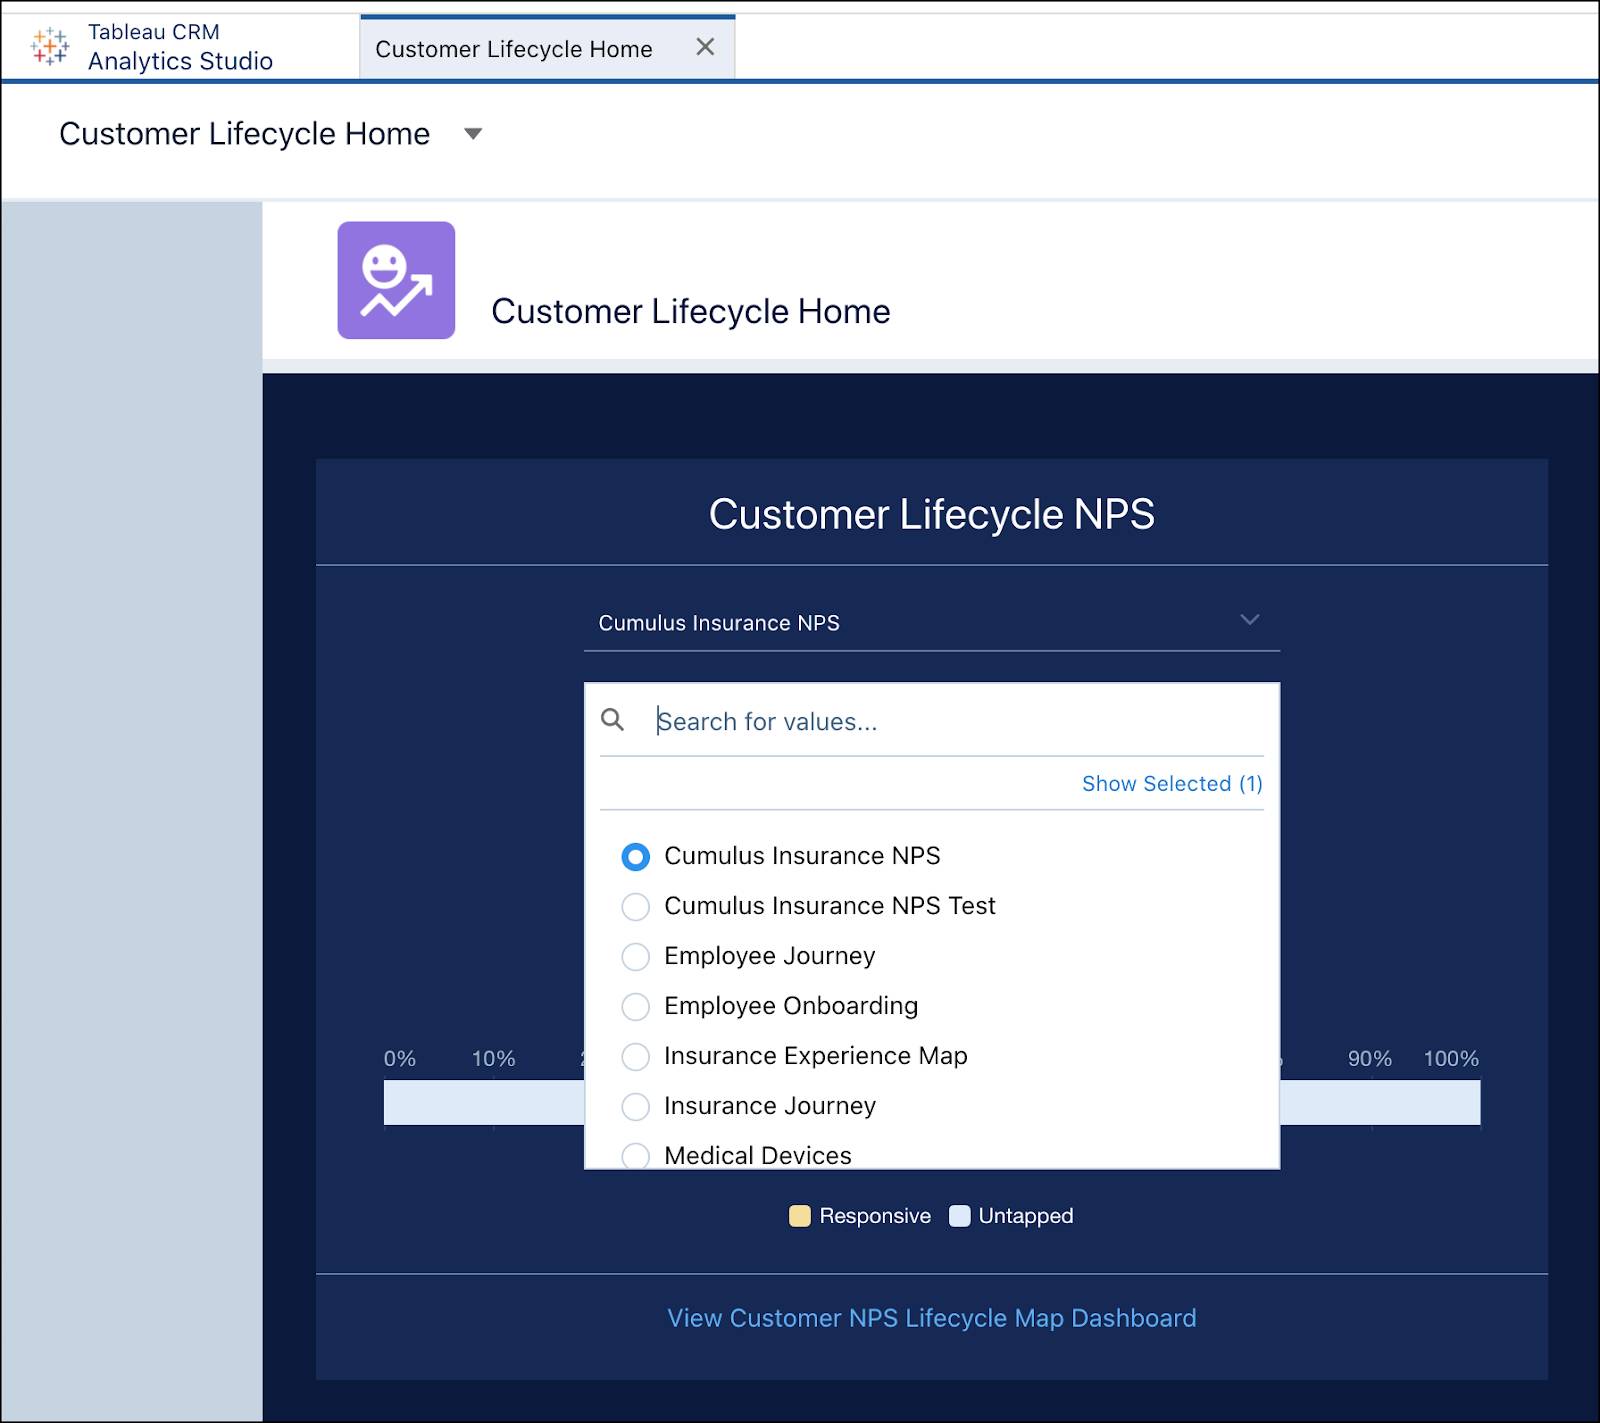 The Customer Lifecycle NPS screen of the Customer Lifecycle Analytics app.